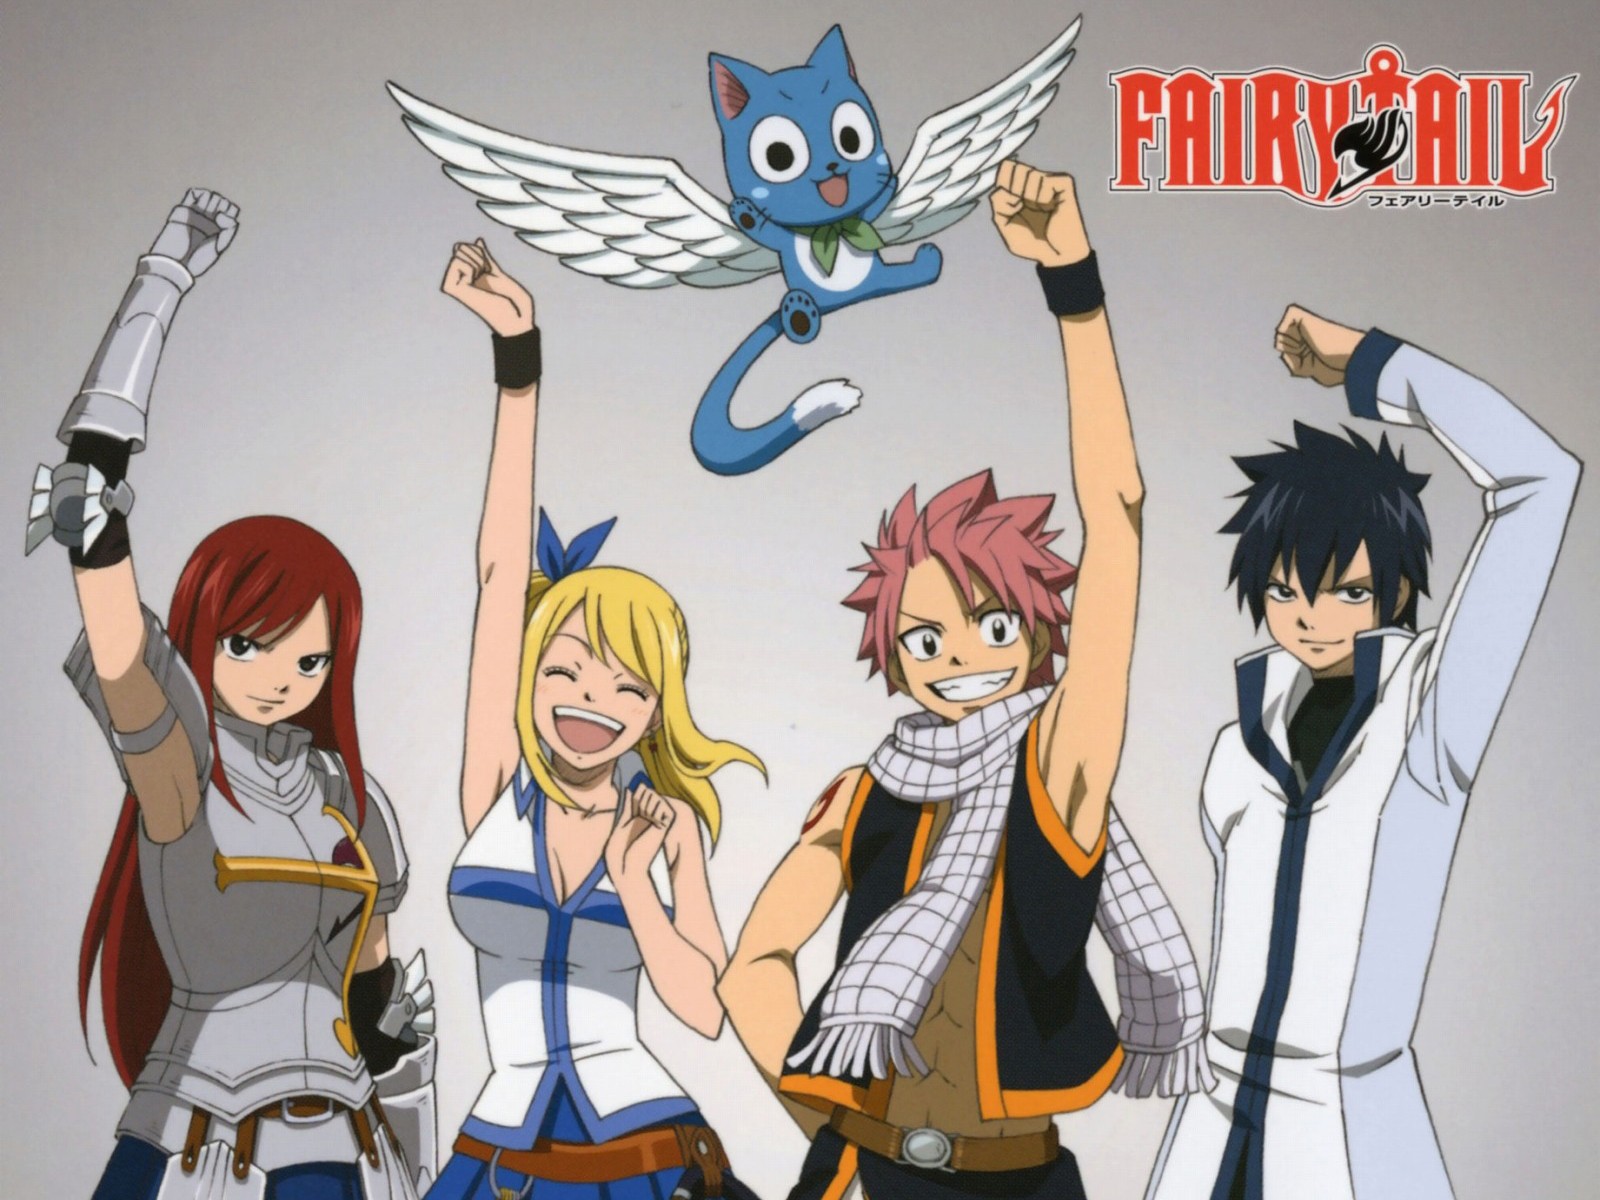 Free Download Fairy Tail Anime Wallpaper Which Is Under The Anime Wallpapers 1600x10 For Your Desktop Mobile Tablet Explore 50 Anime Wallpaper Fairy Tale Fairy Tail Wallpaper Hd